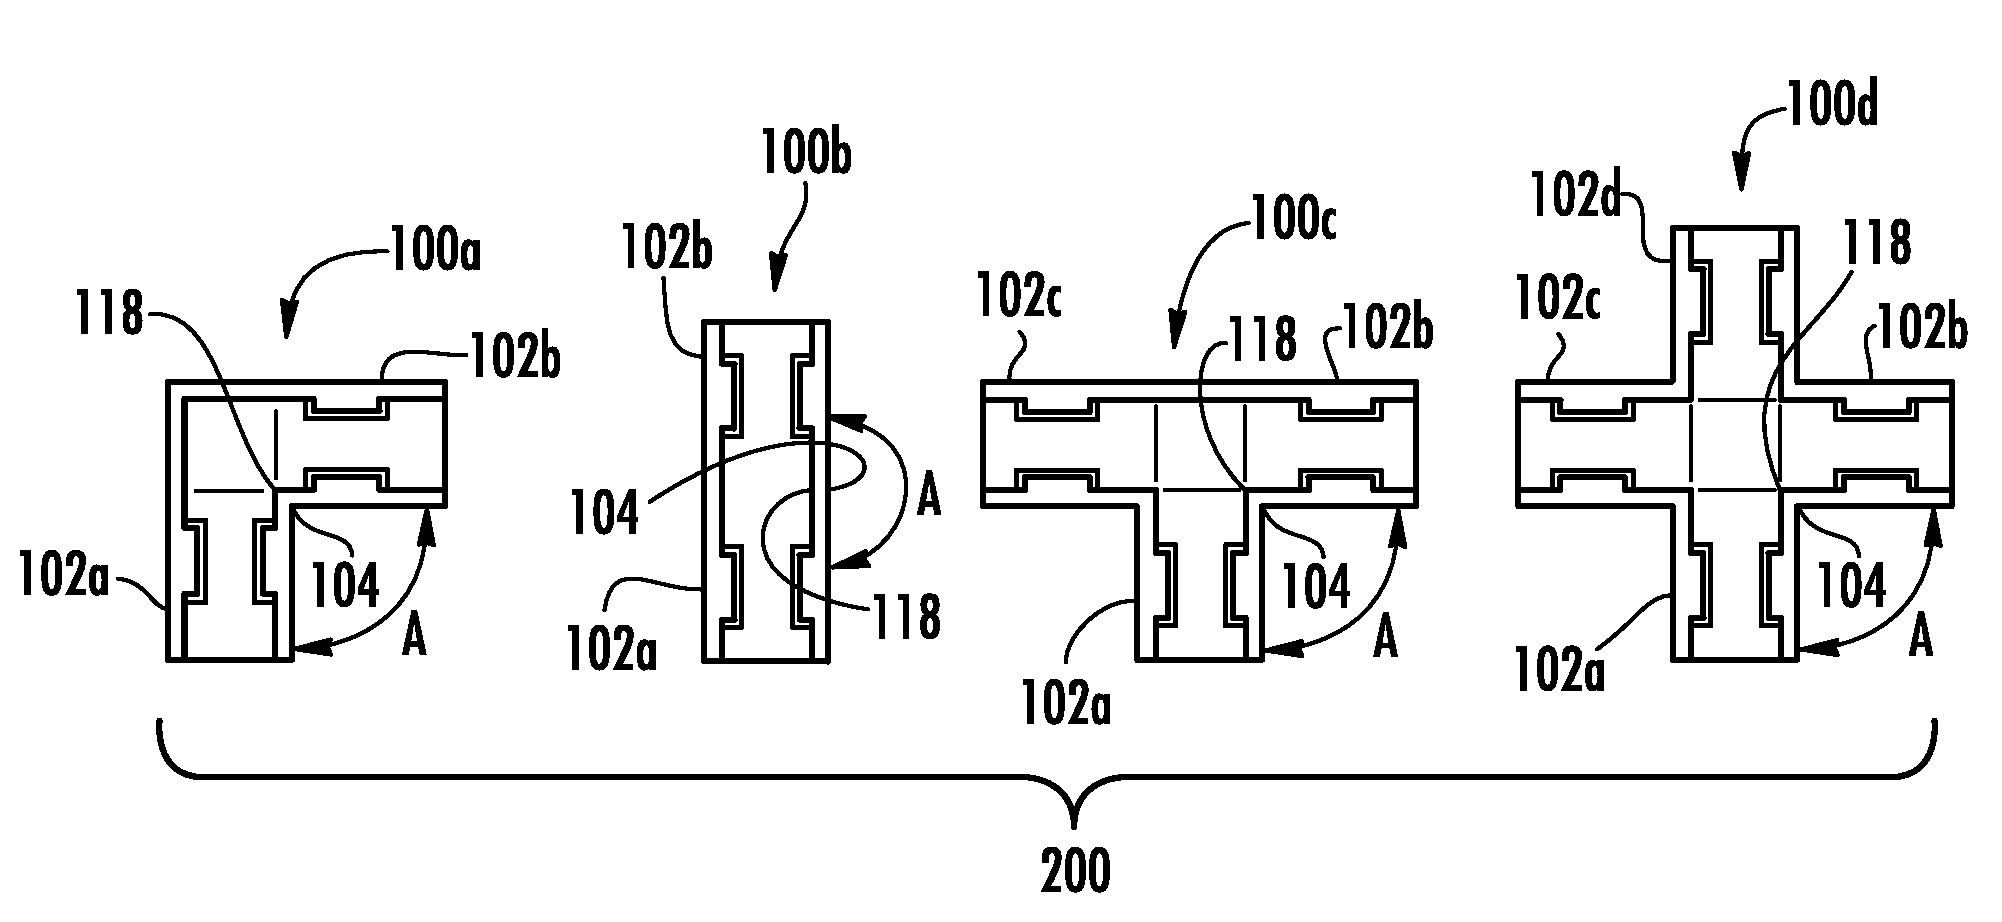 Scale coupling system